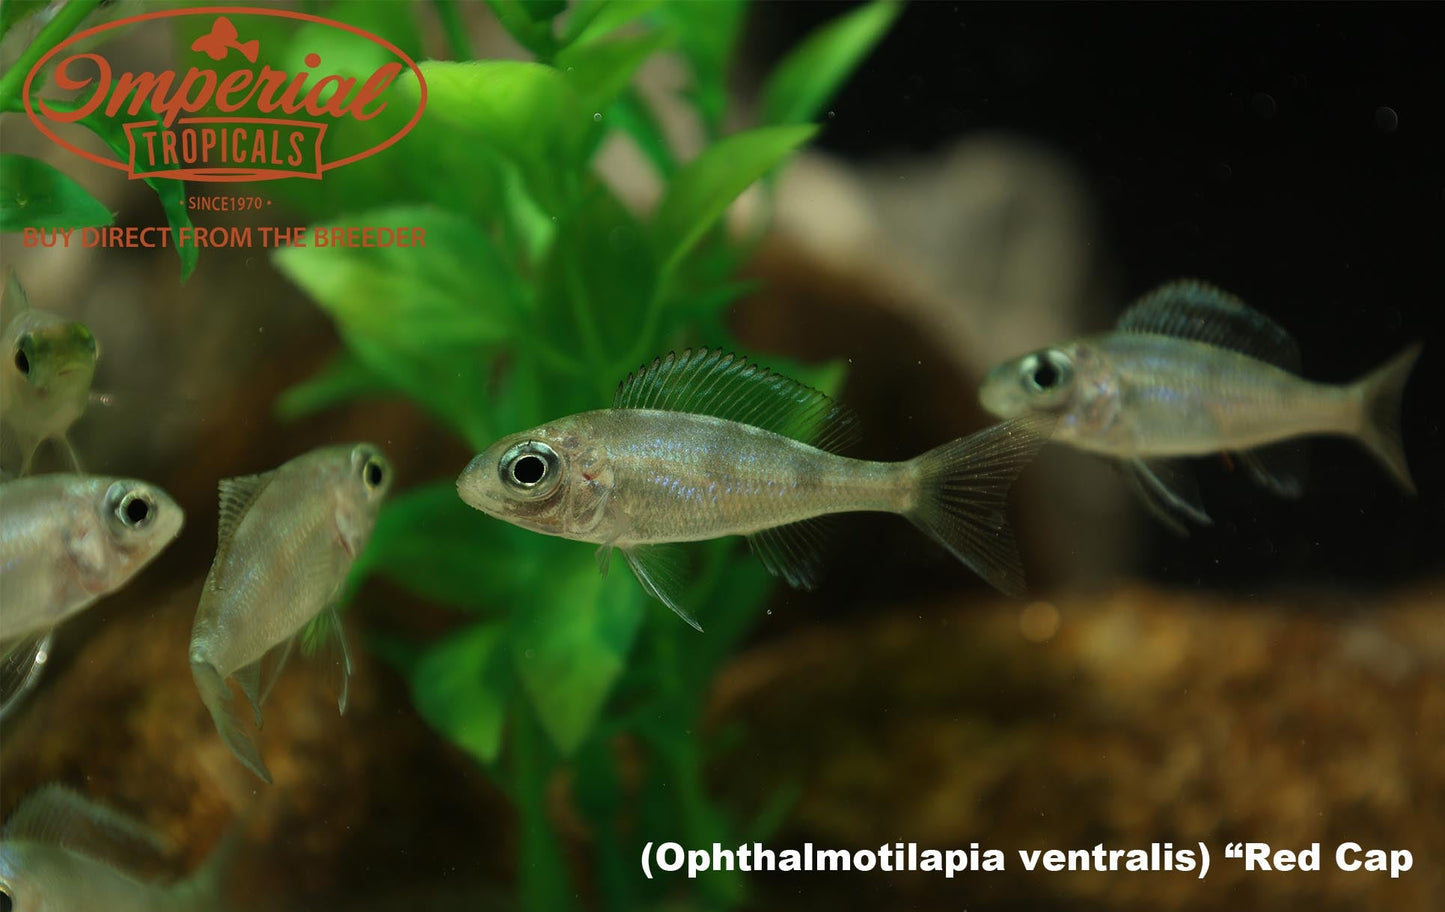 Ophthalmotilapia ventralis "Red Cap"